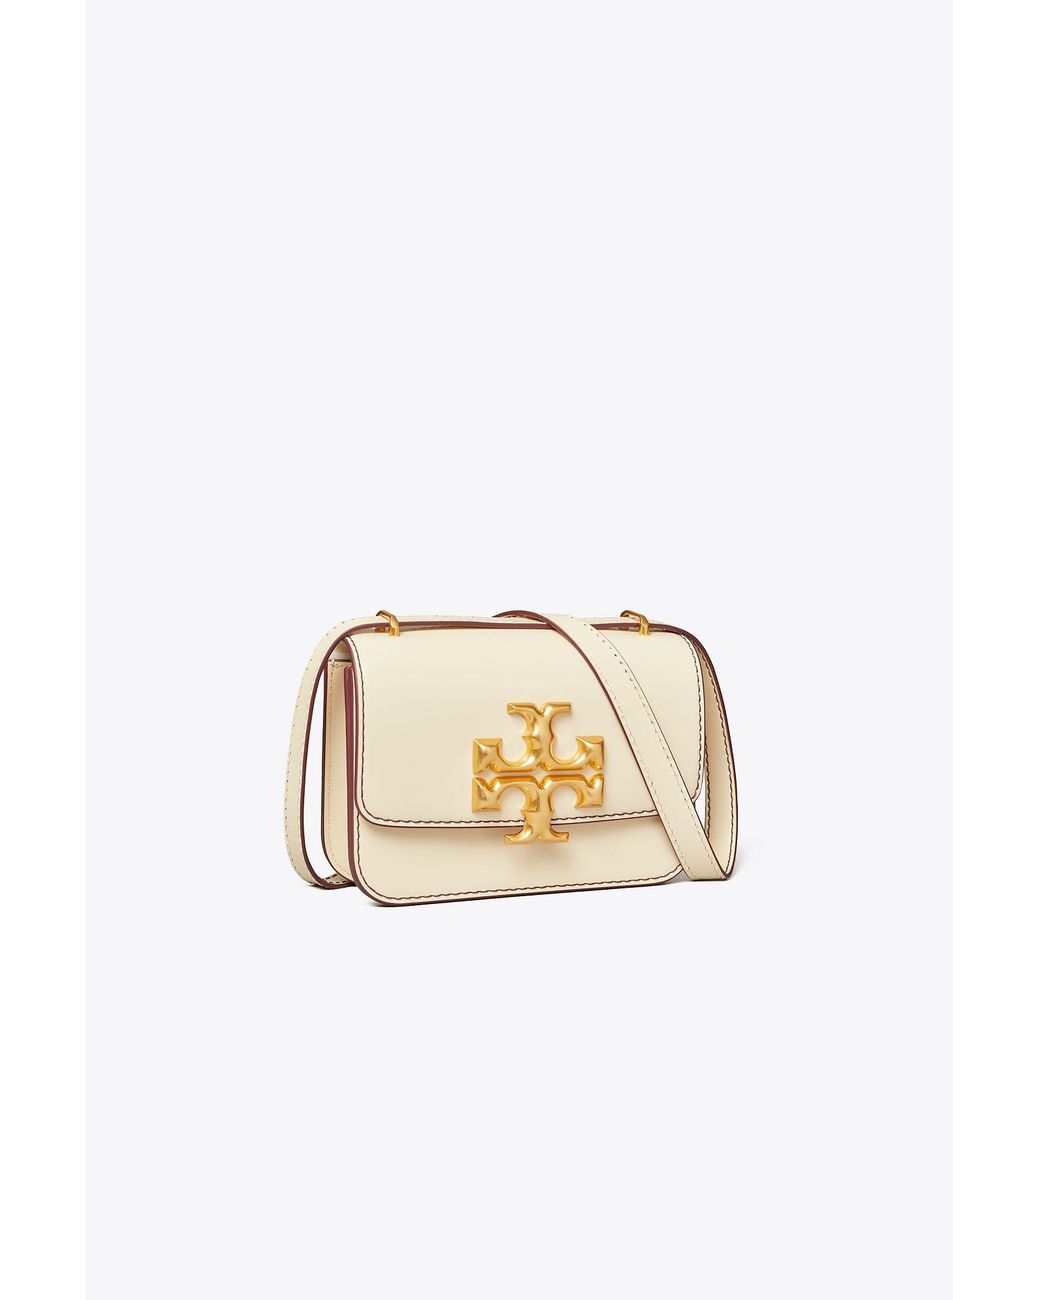 Tory Burch - The small Eleanor Bag with contrast stitching #ToryBurchFW21  Discover Now